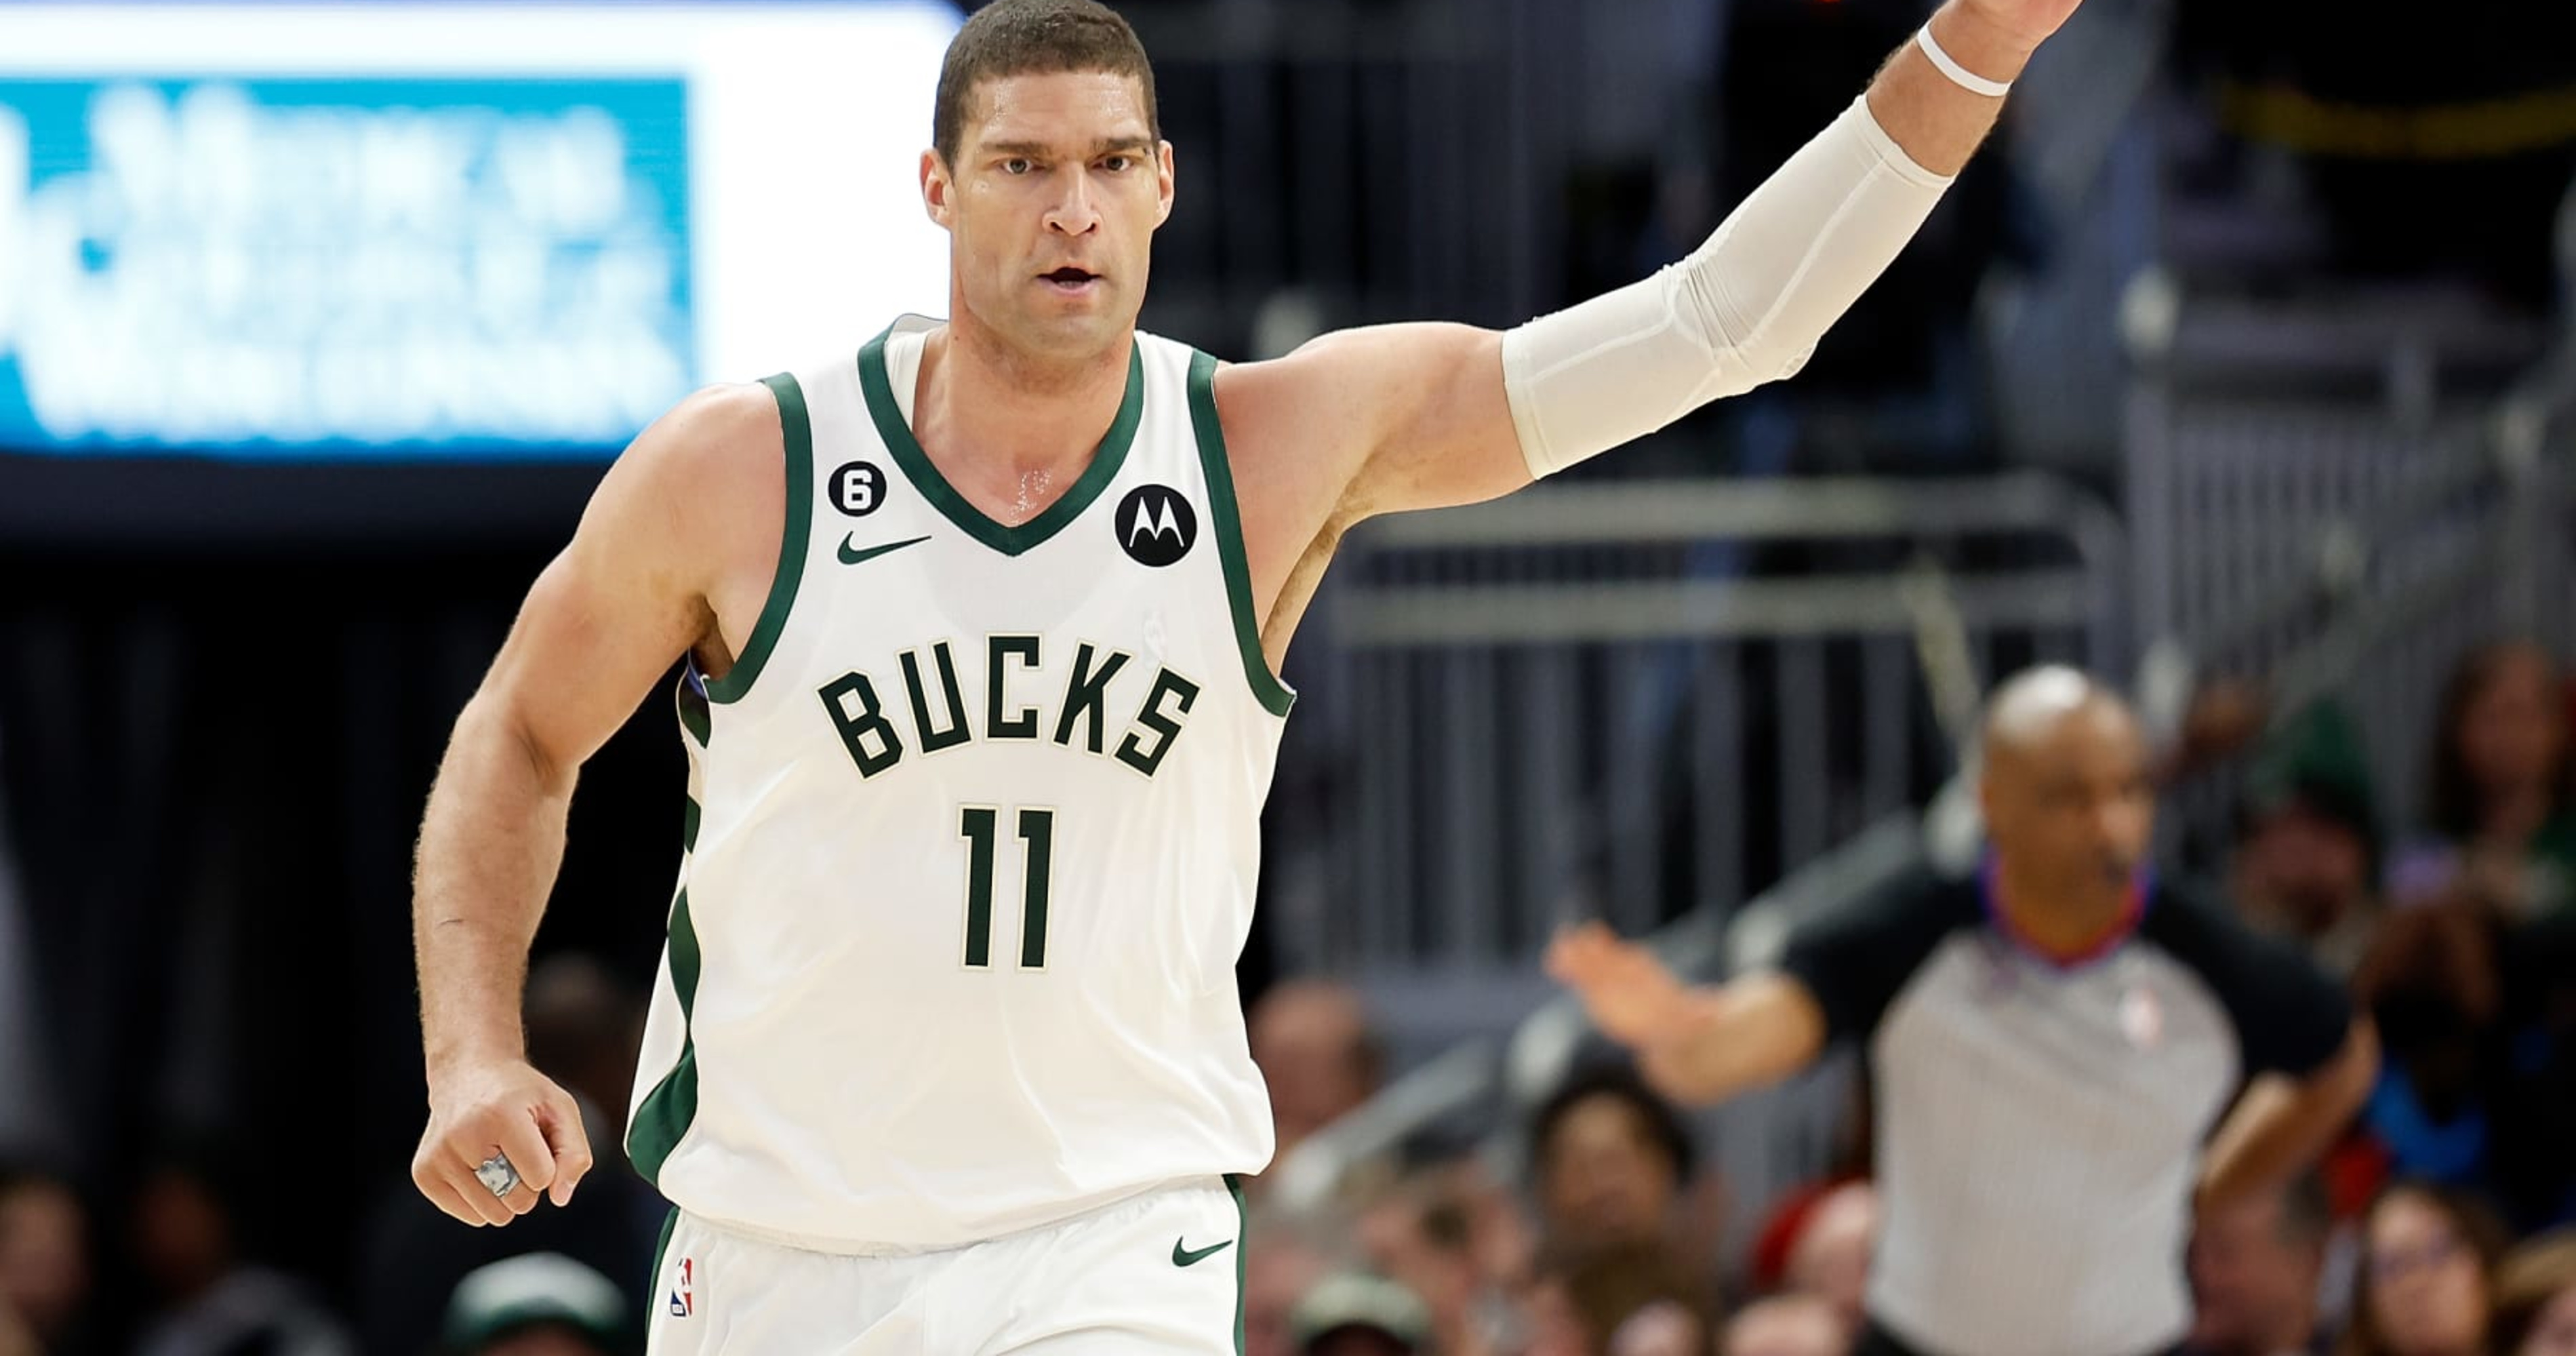 NBA Free Agency: Brook Lopez is a good fit for the Rockets - The Dream Shake